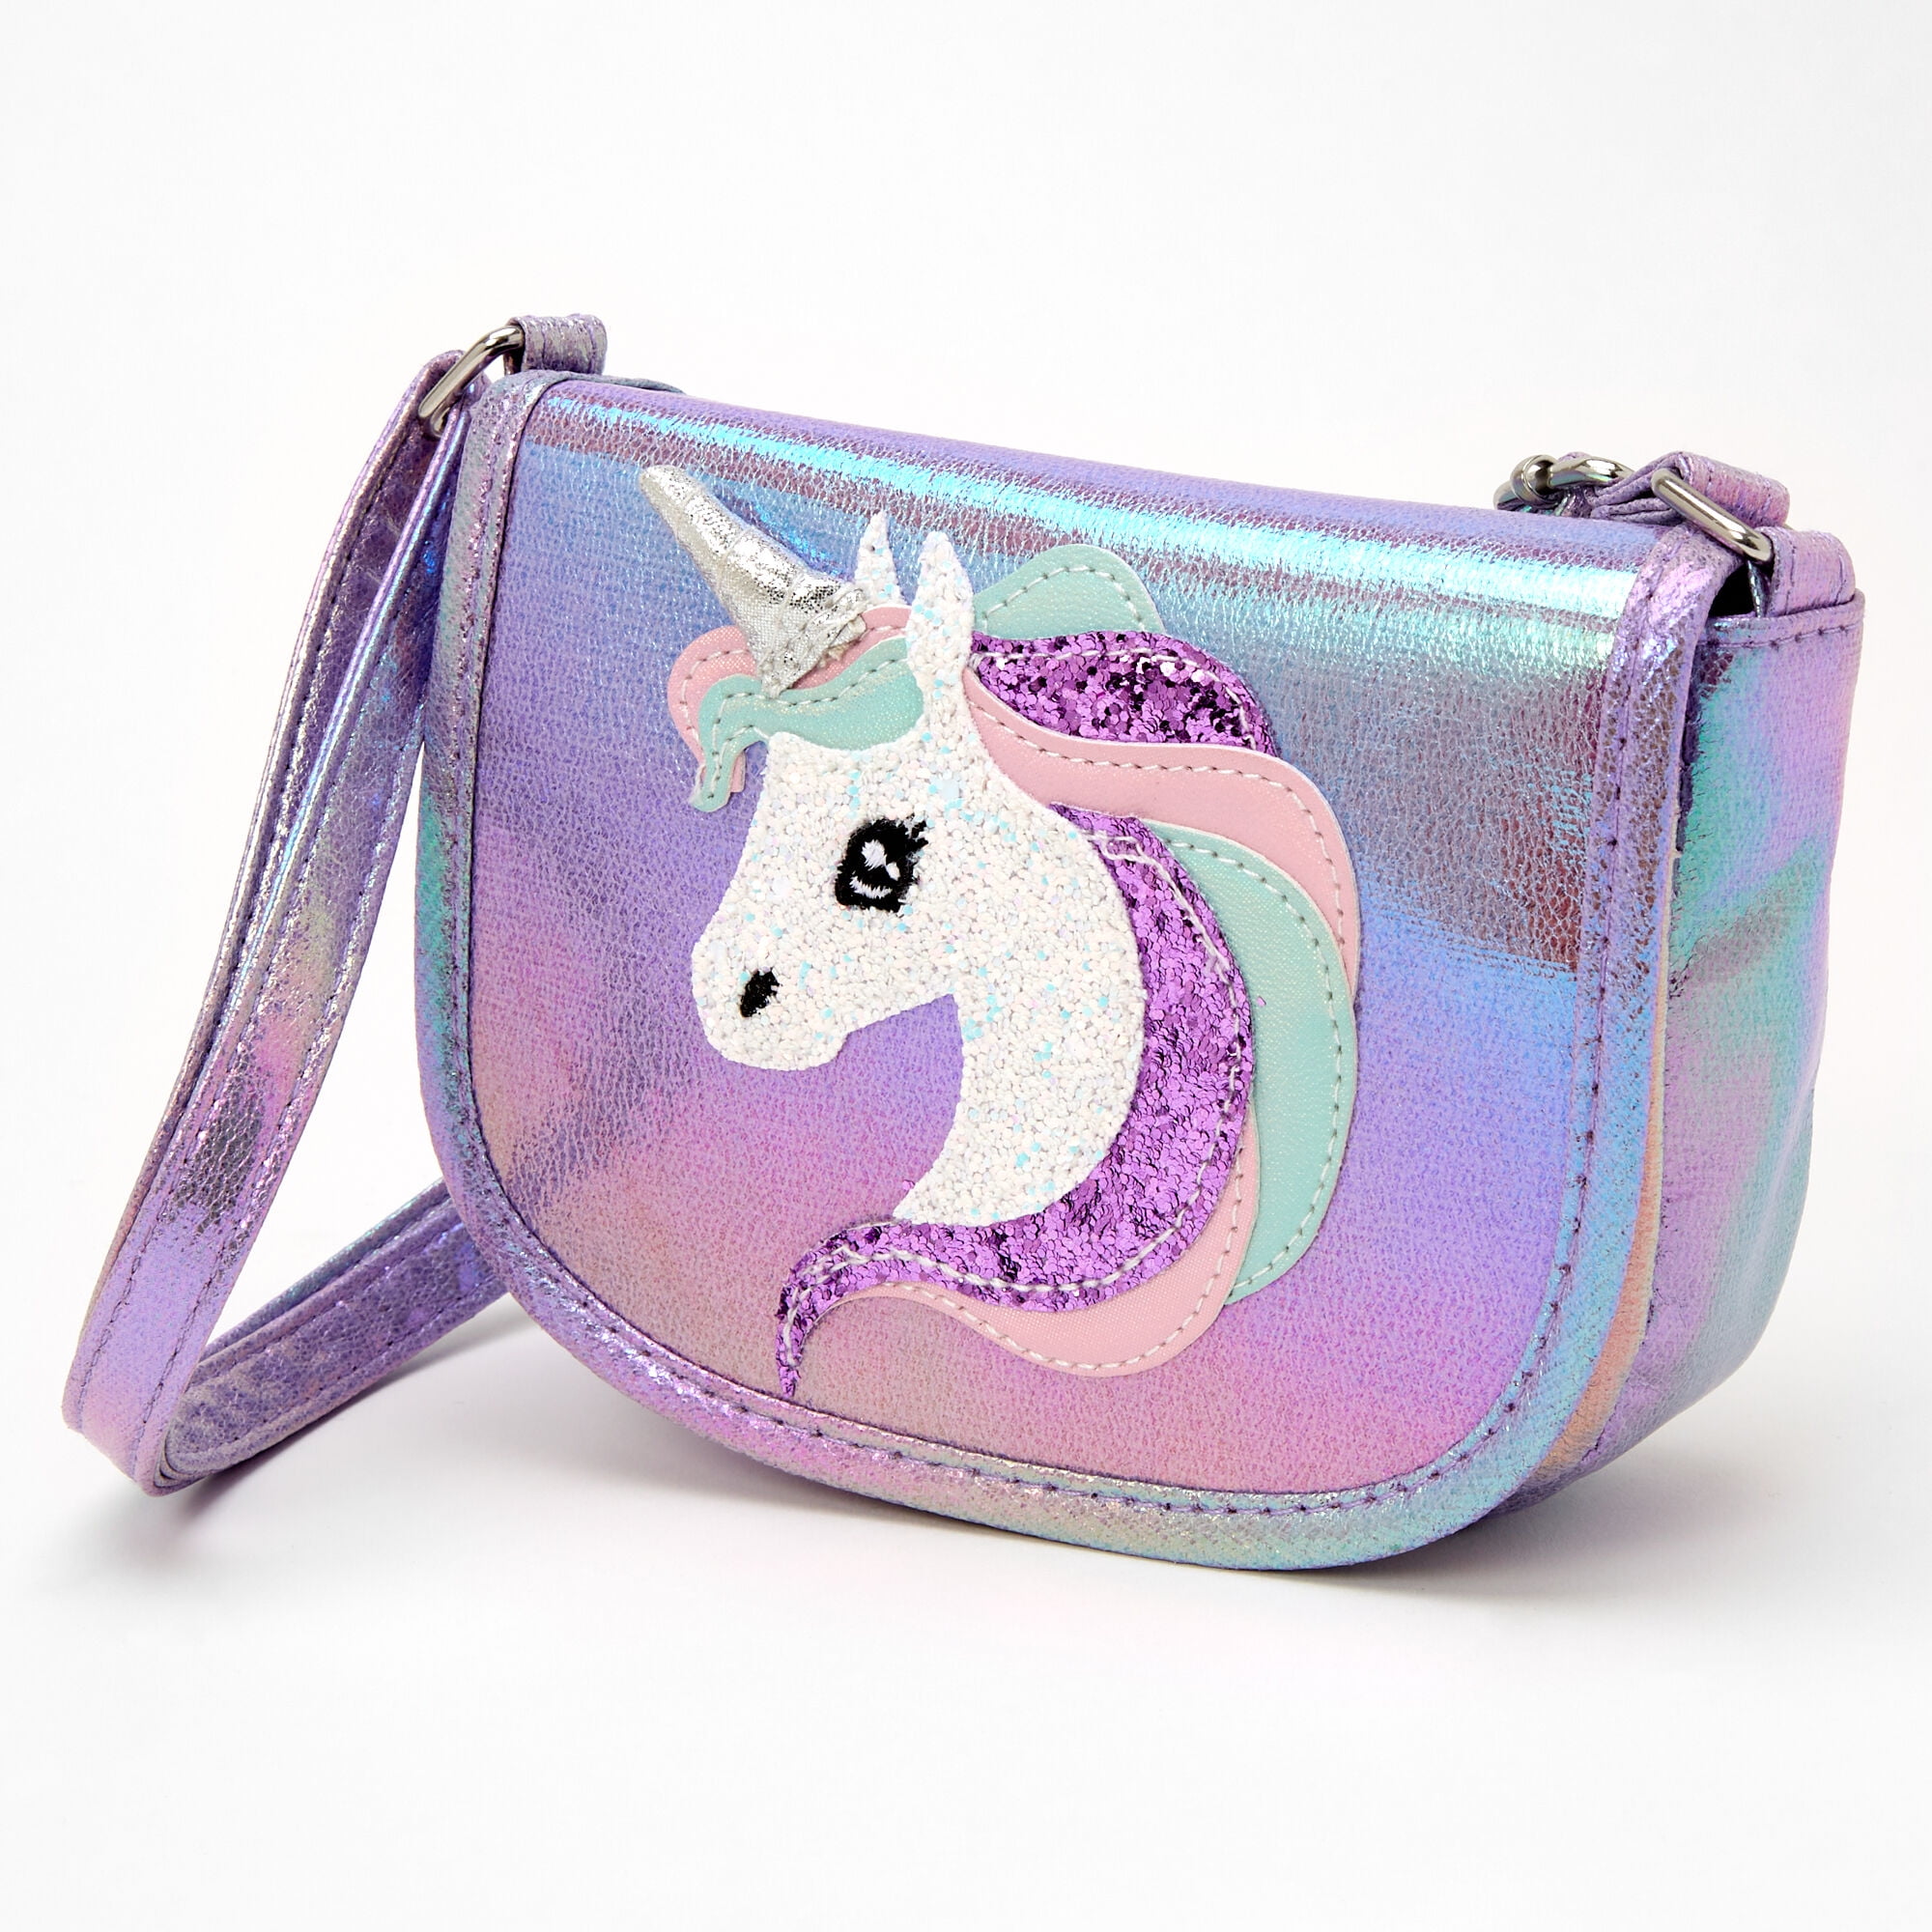 Purse Pets, Interactive Glamicorn with Over 25 Sounds and Reactions -  Walmart.com